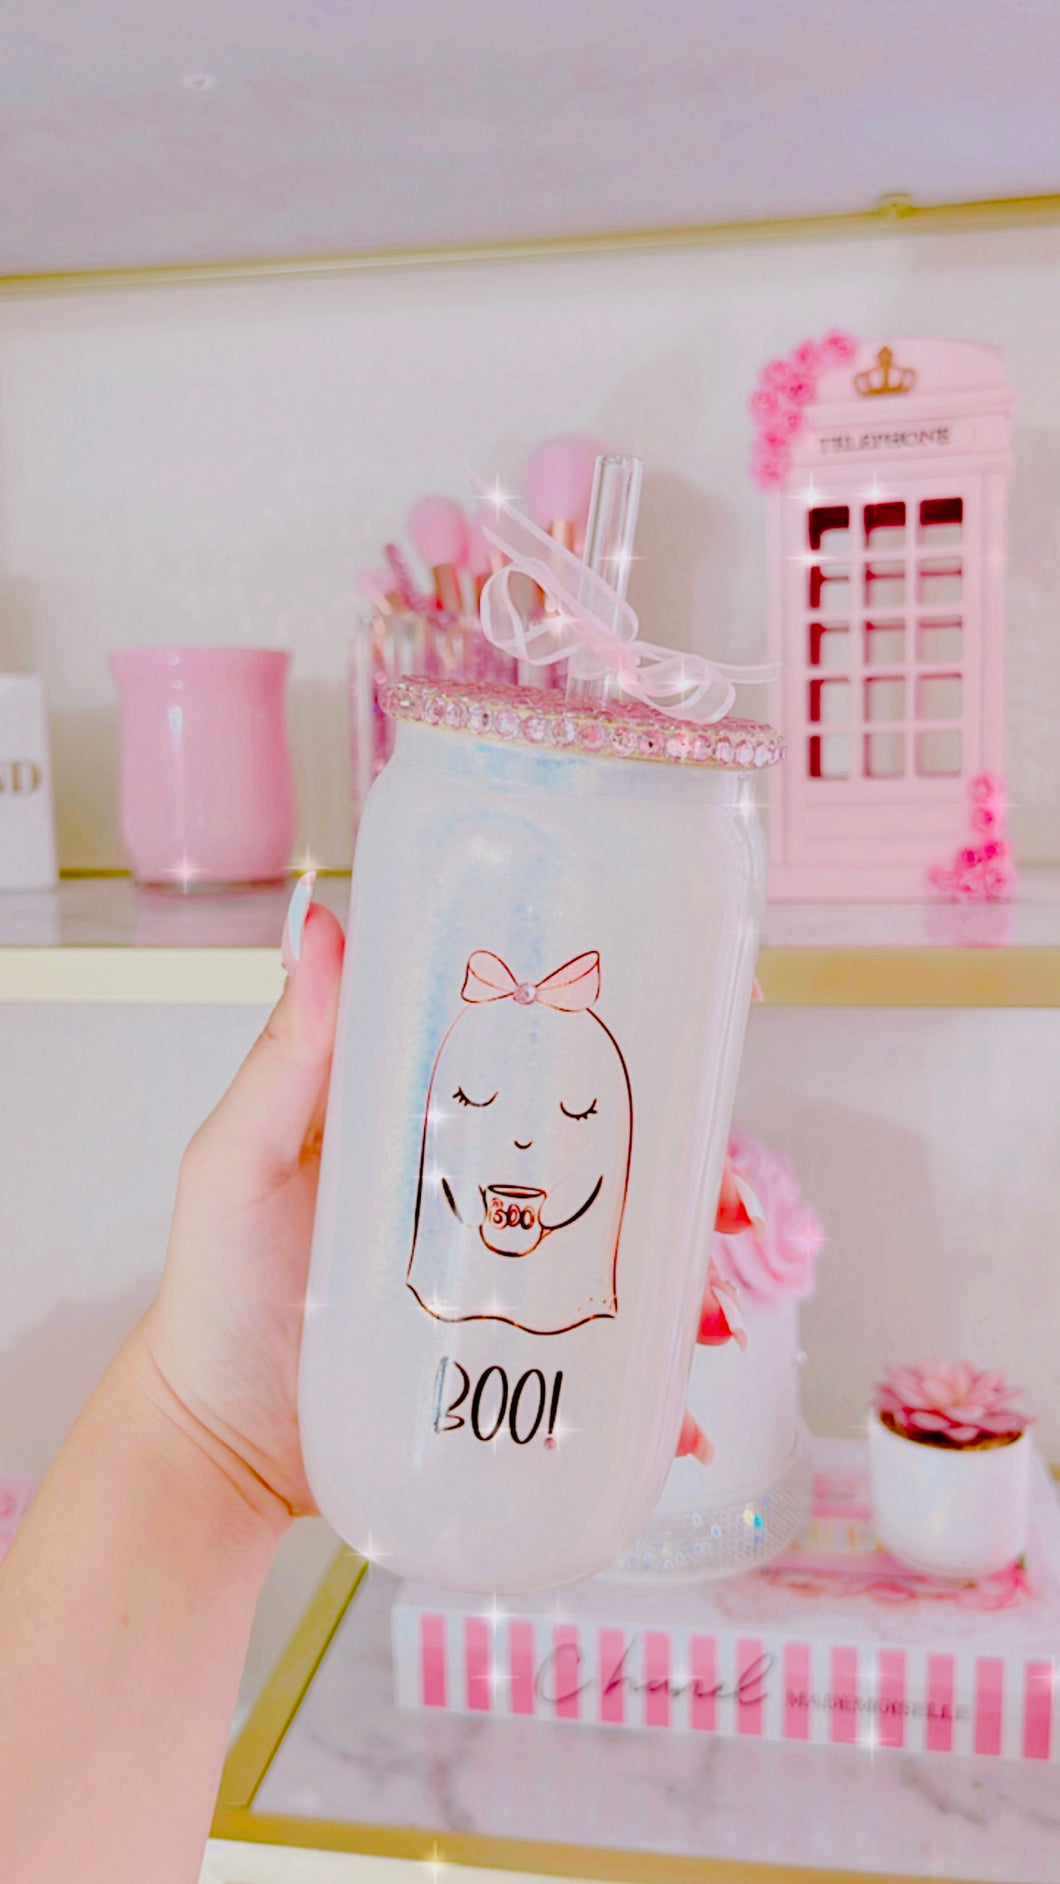 BOO! Sublimation glass can